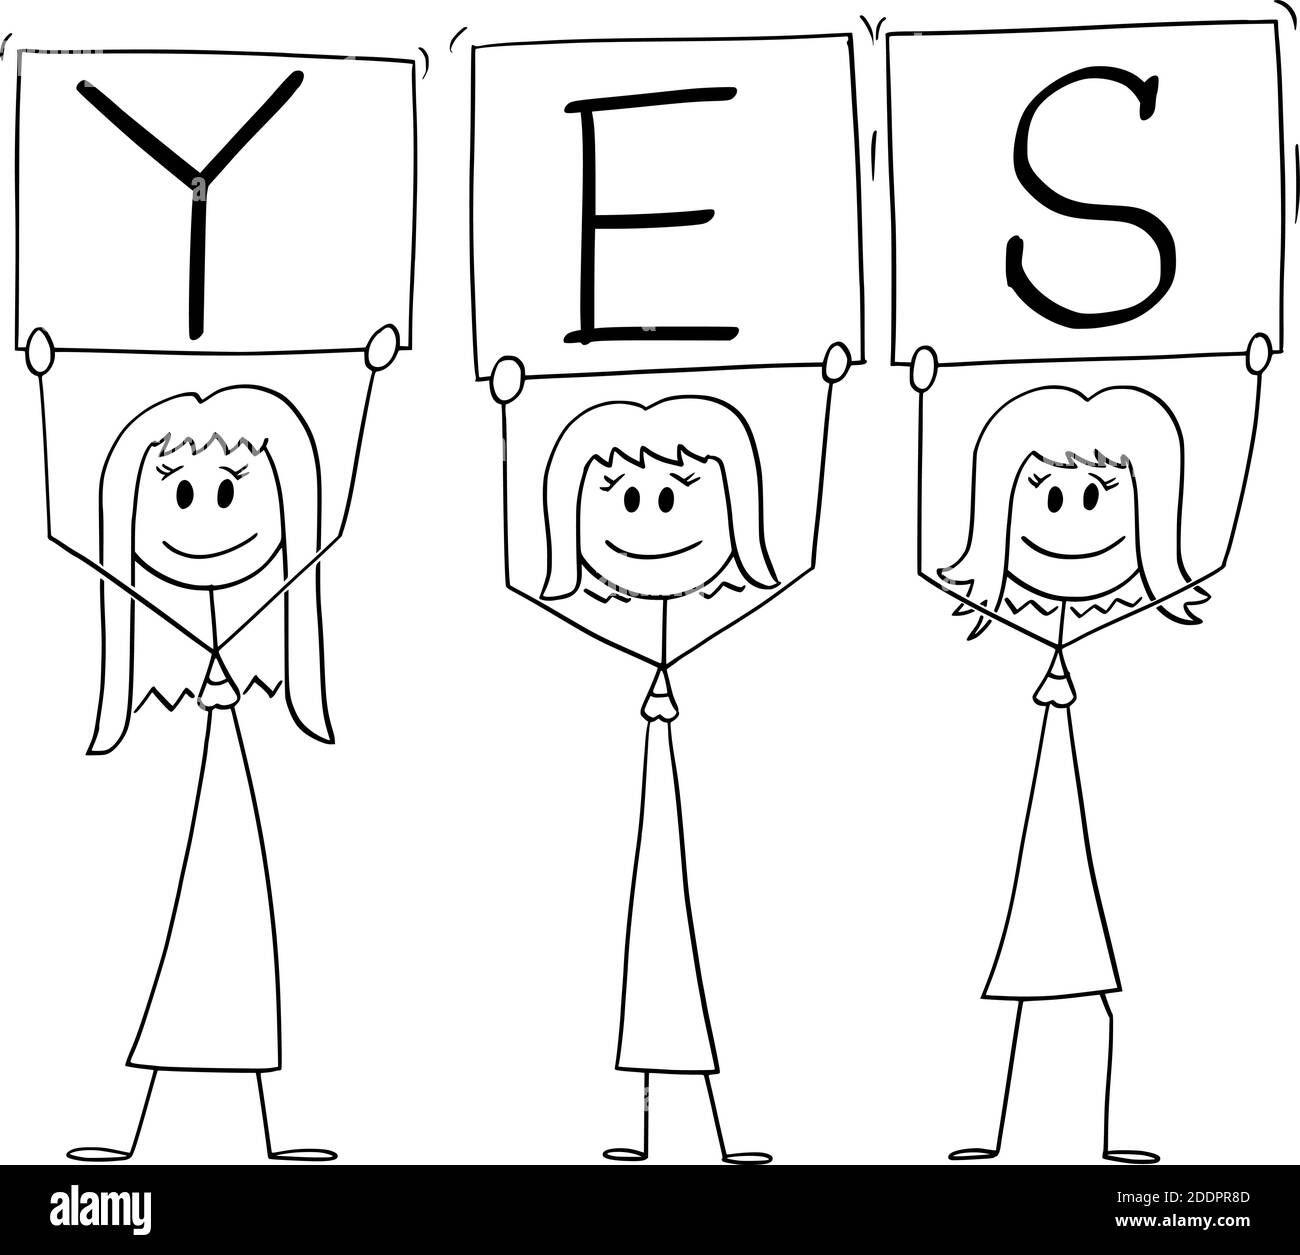 Vector cartoon stick figure illustration of three smiling positive women on demonstration holding yes signs. Stock Vector